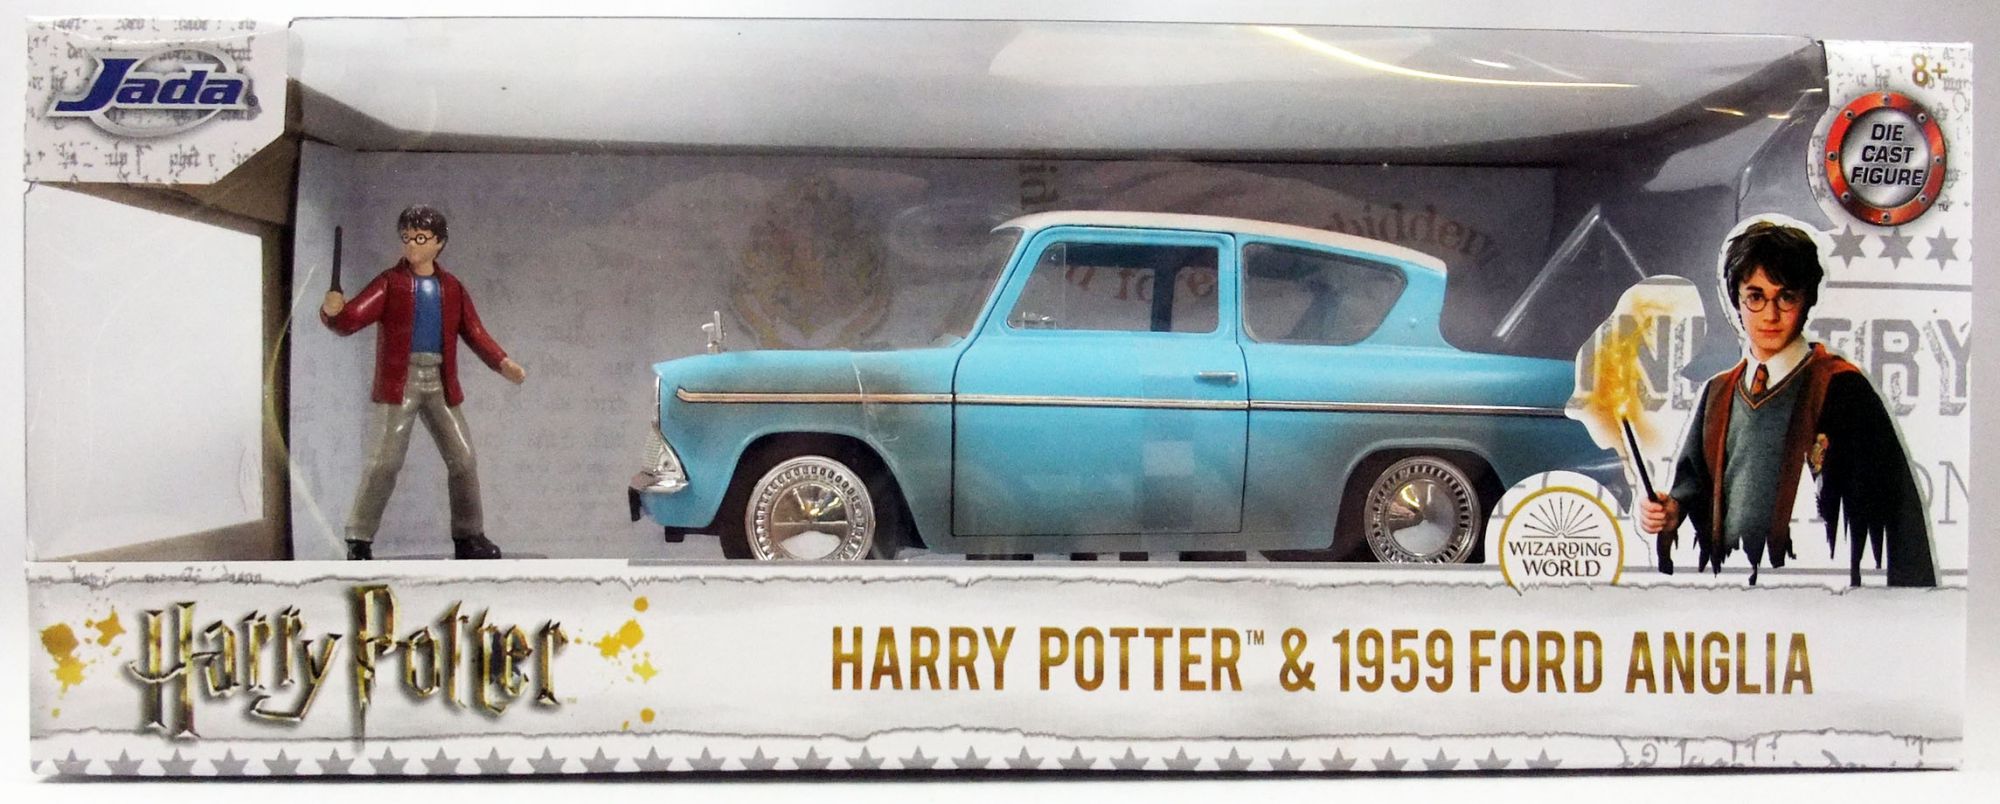 Jada Toys 1:24 Harry Potter and 1959 Ford Anglia Die-Cast Toy Car